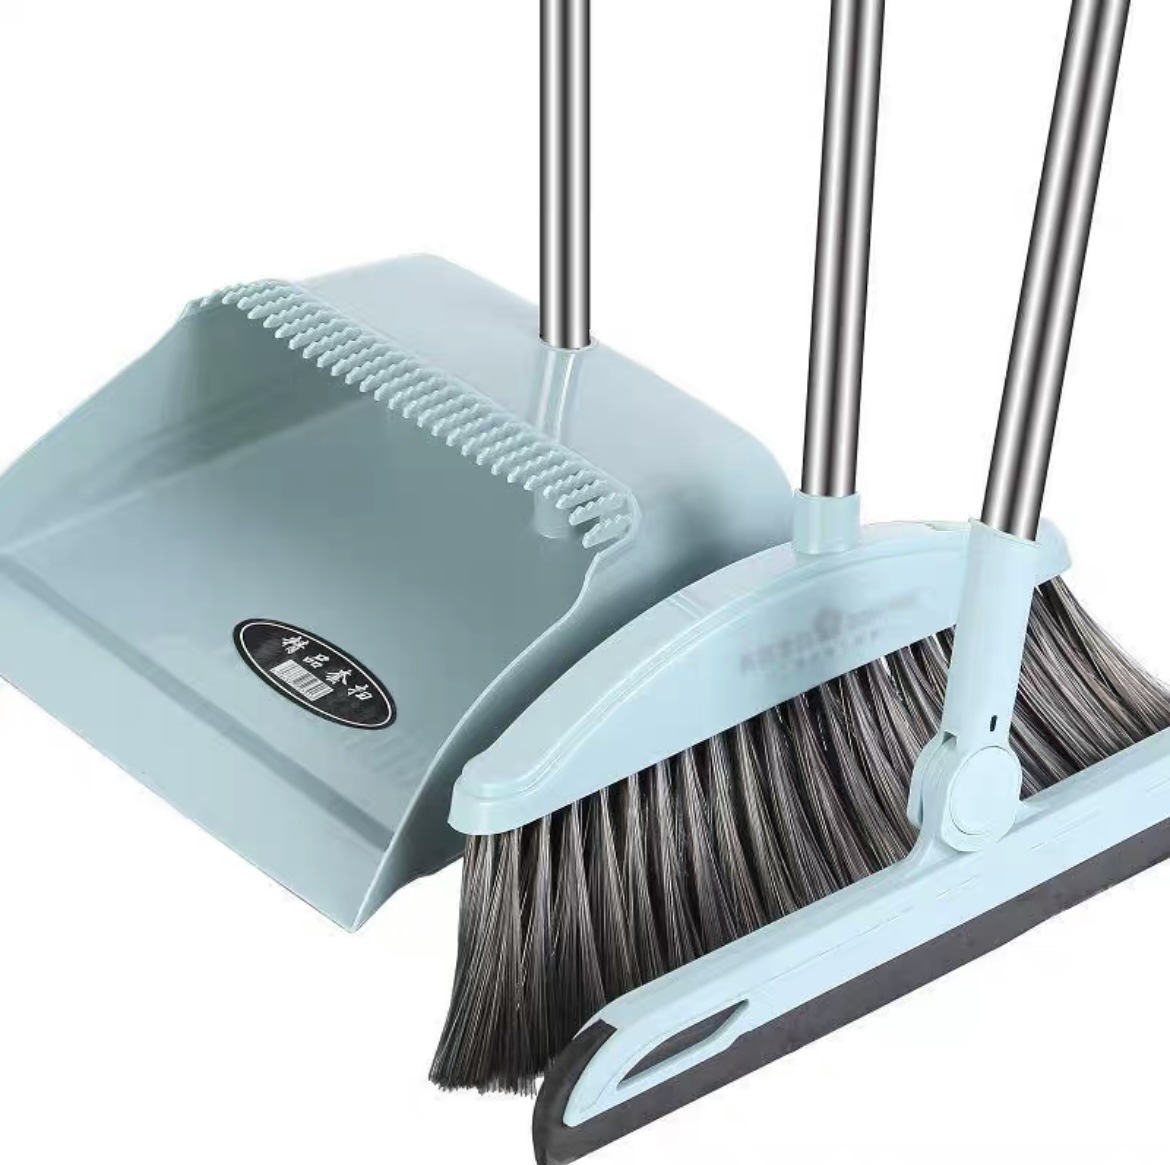 Factory Direct Sales Broom Set Household Cleaning Broom Dustpan Combination Broom Folding Sweeping Non-Viscous Soft Hair